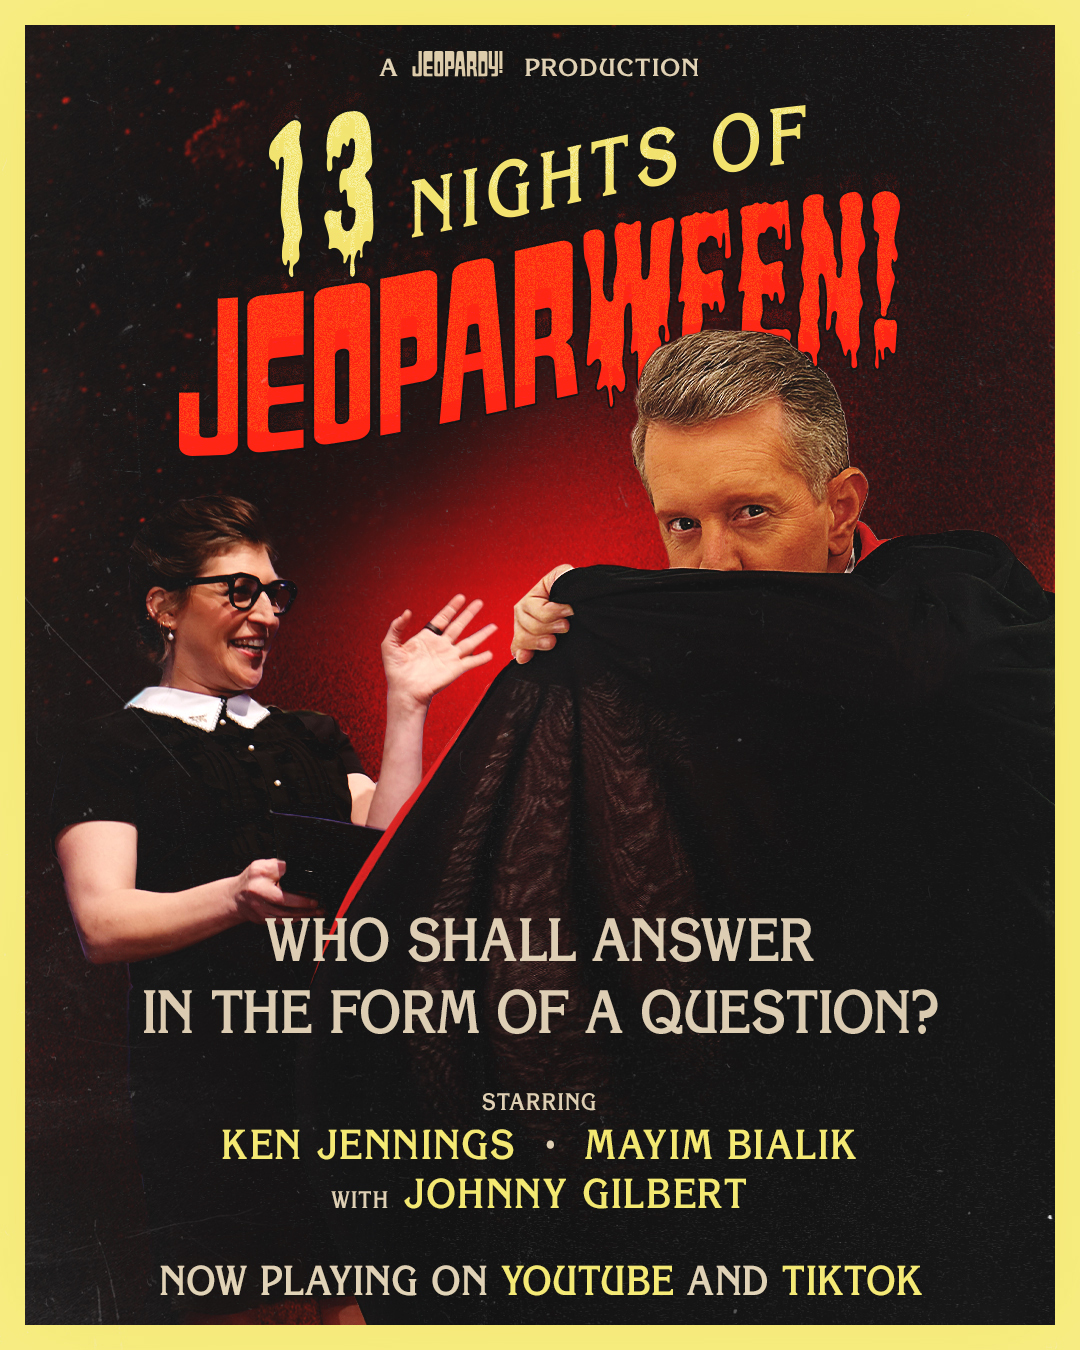 Mayim and her Jeopardy co-host Ken Jennings appeared in a Halloween-themed Jeopardy promo ad